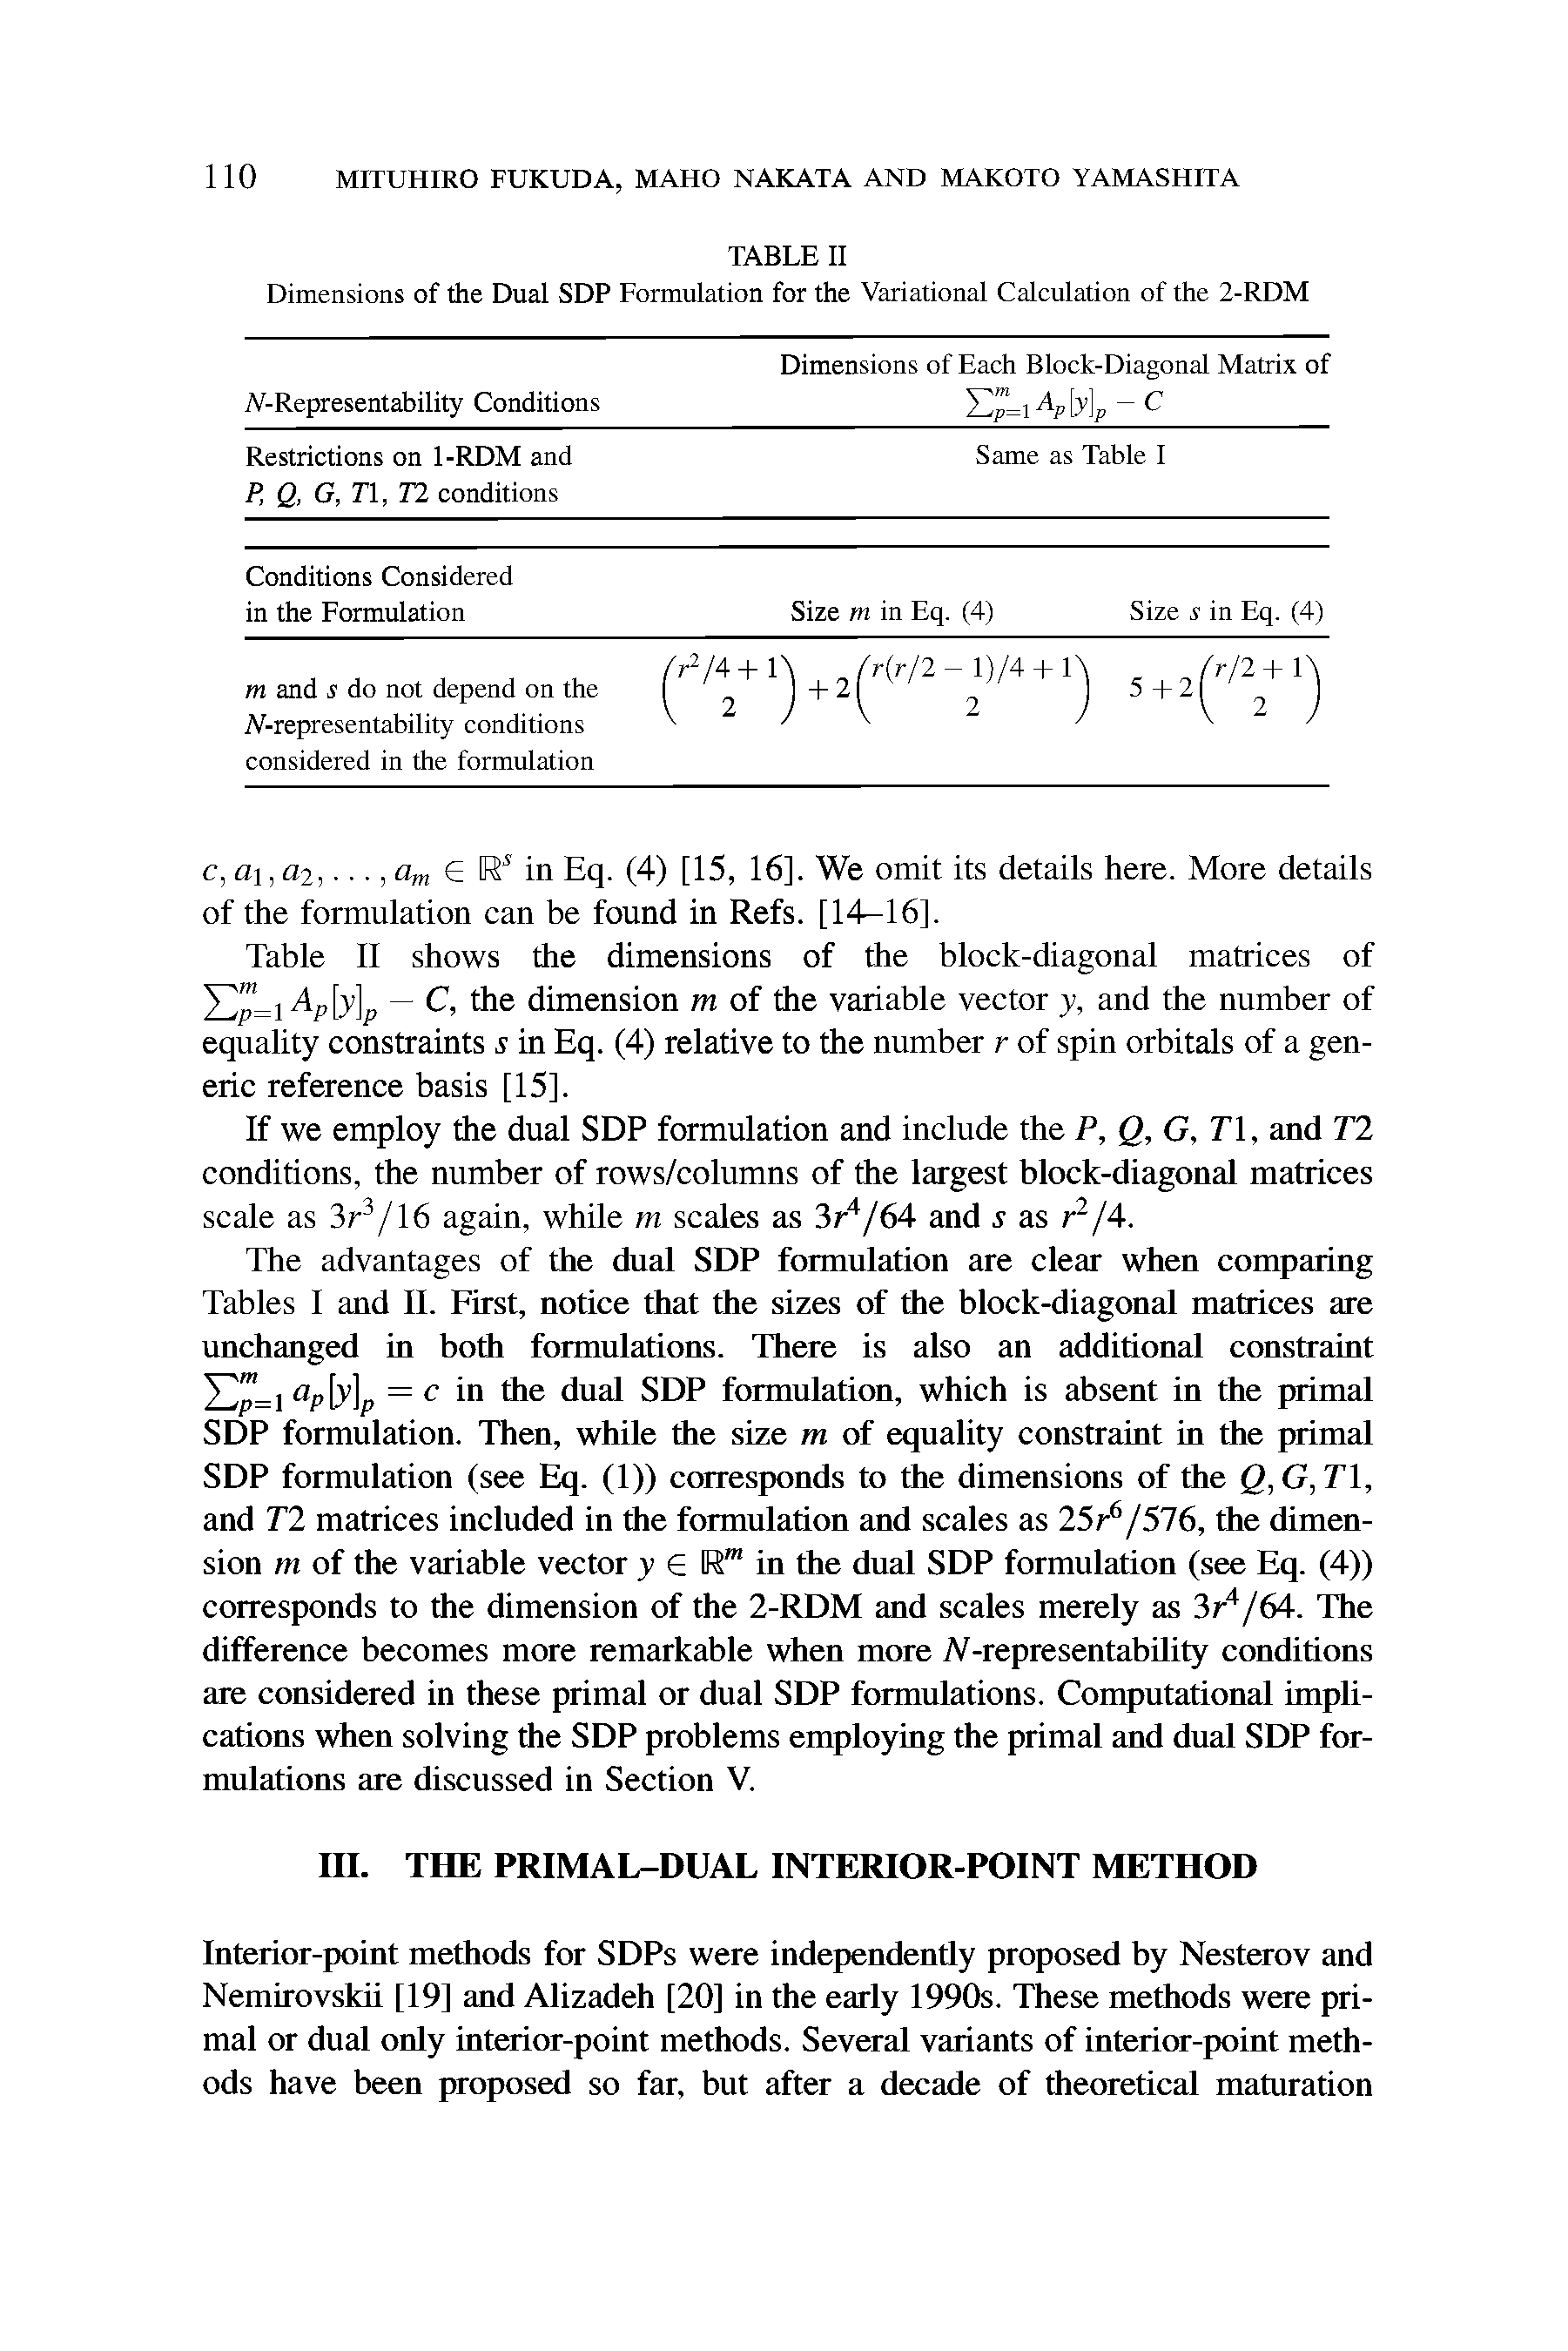 Table II shows the dimensions of the block-diagonal matrices of Y p= Ap[y]p — C, the dimension m of the variable vector y, and the number of equality constraints s in Eq. (4) relative to the number r of spin orbitals of a generic reference basis [15].